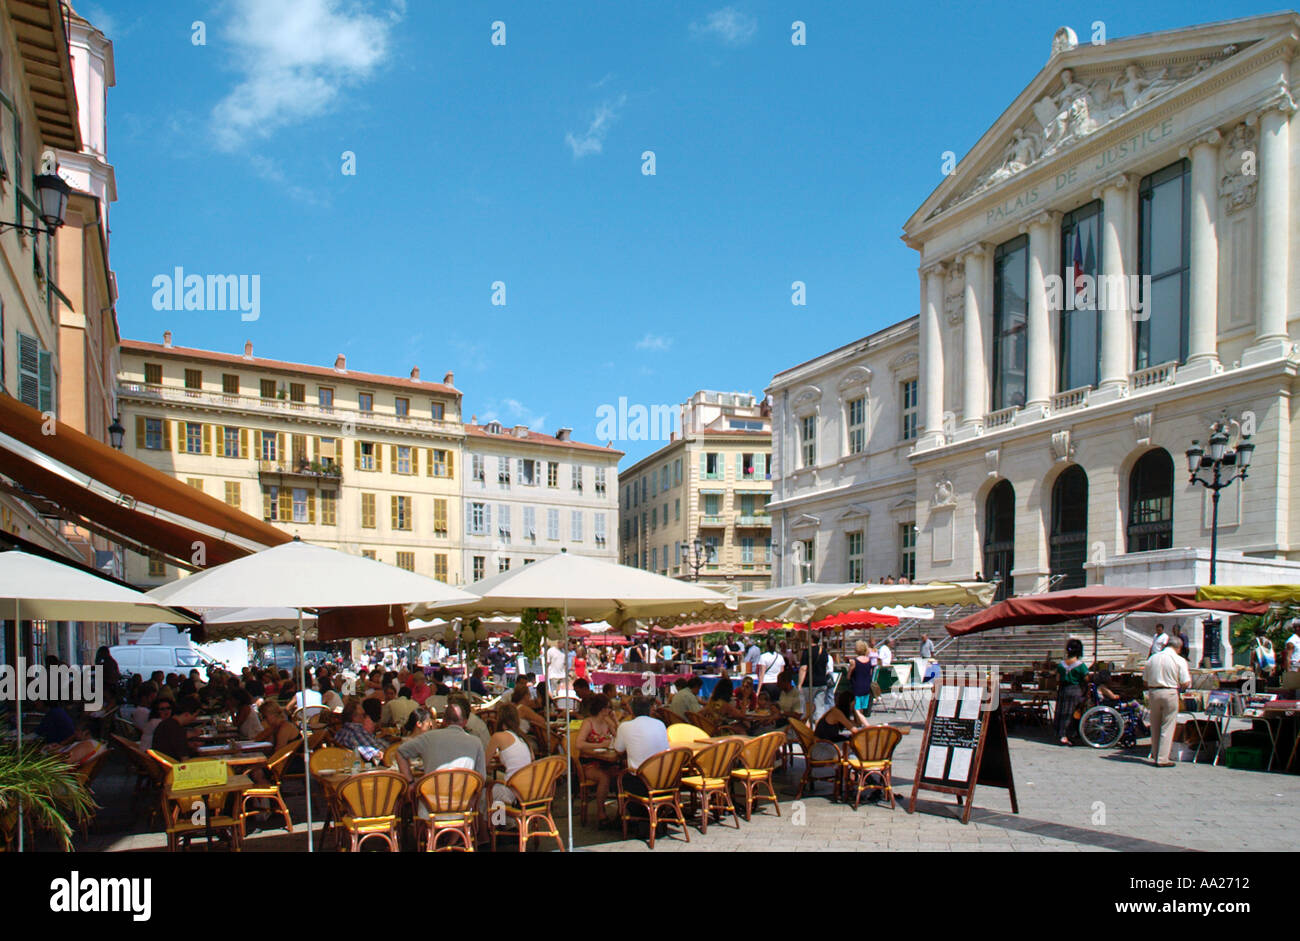 Restaurants outside the Palais de Justice, Old Town (Vieux Nice), Nice, France Stock Photo